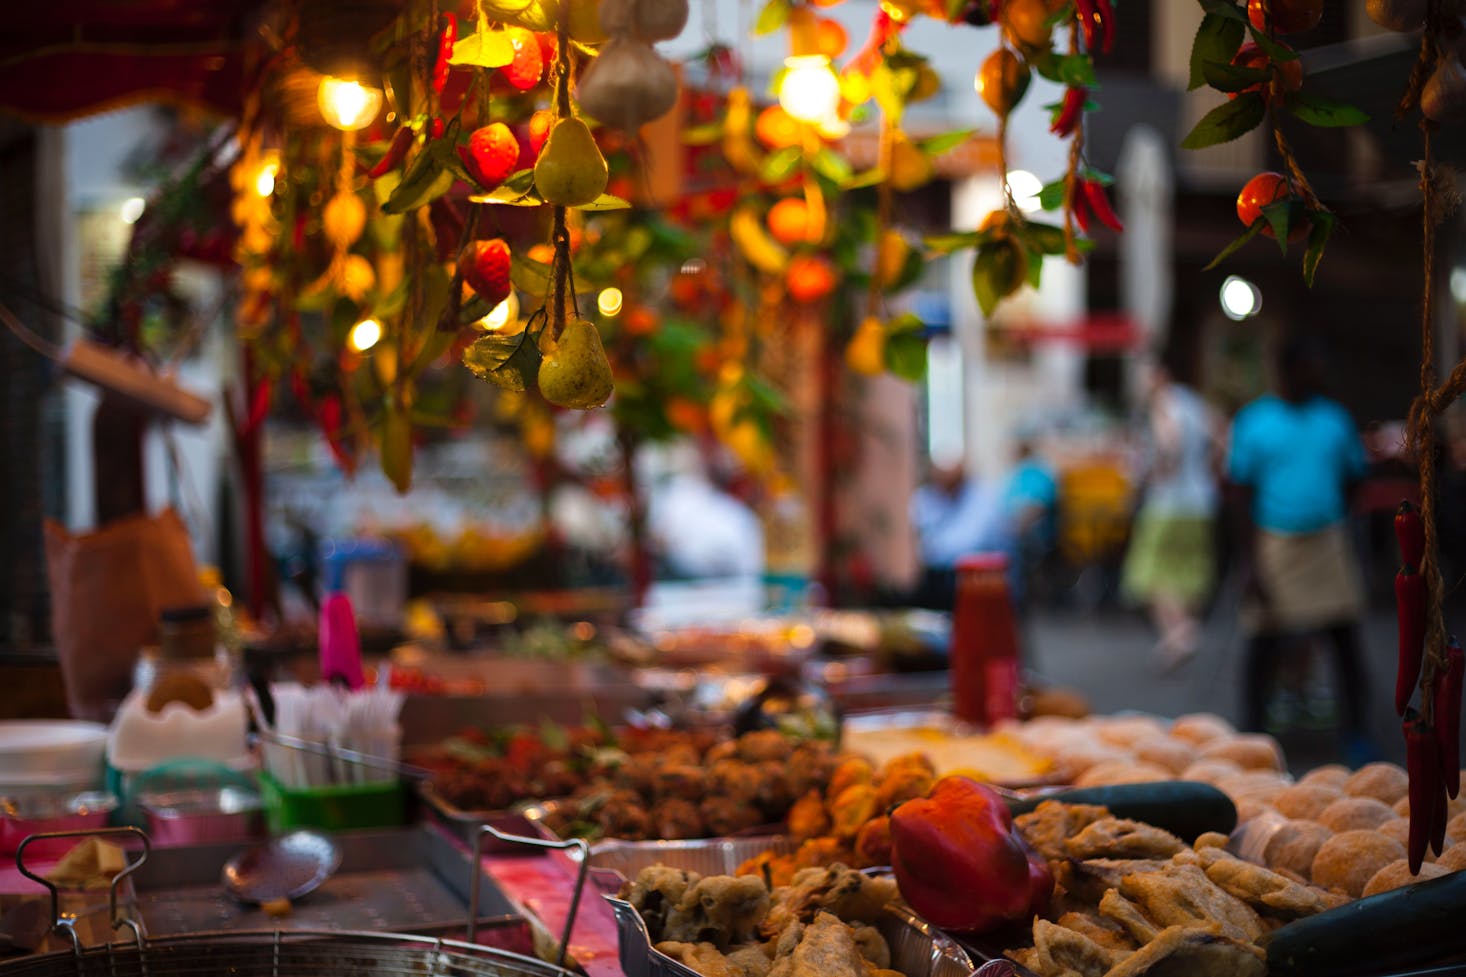 Street food in Palermo at night